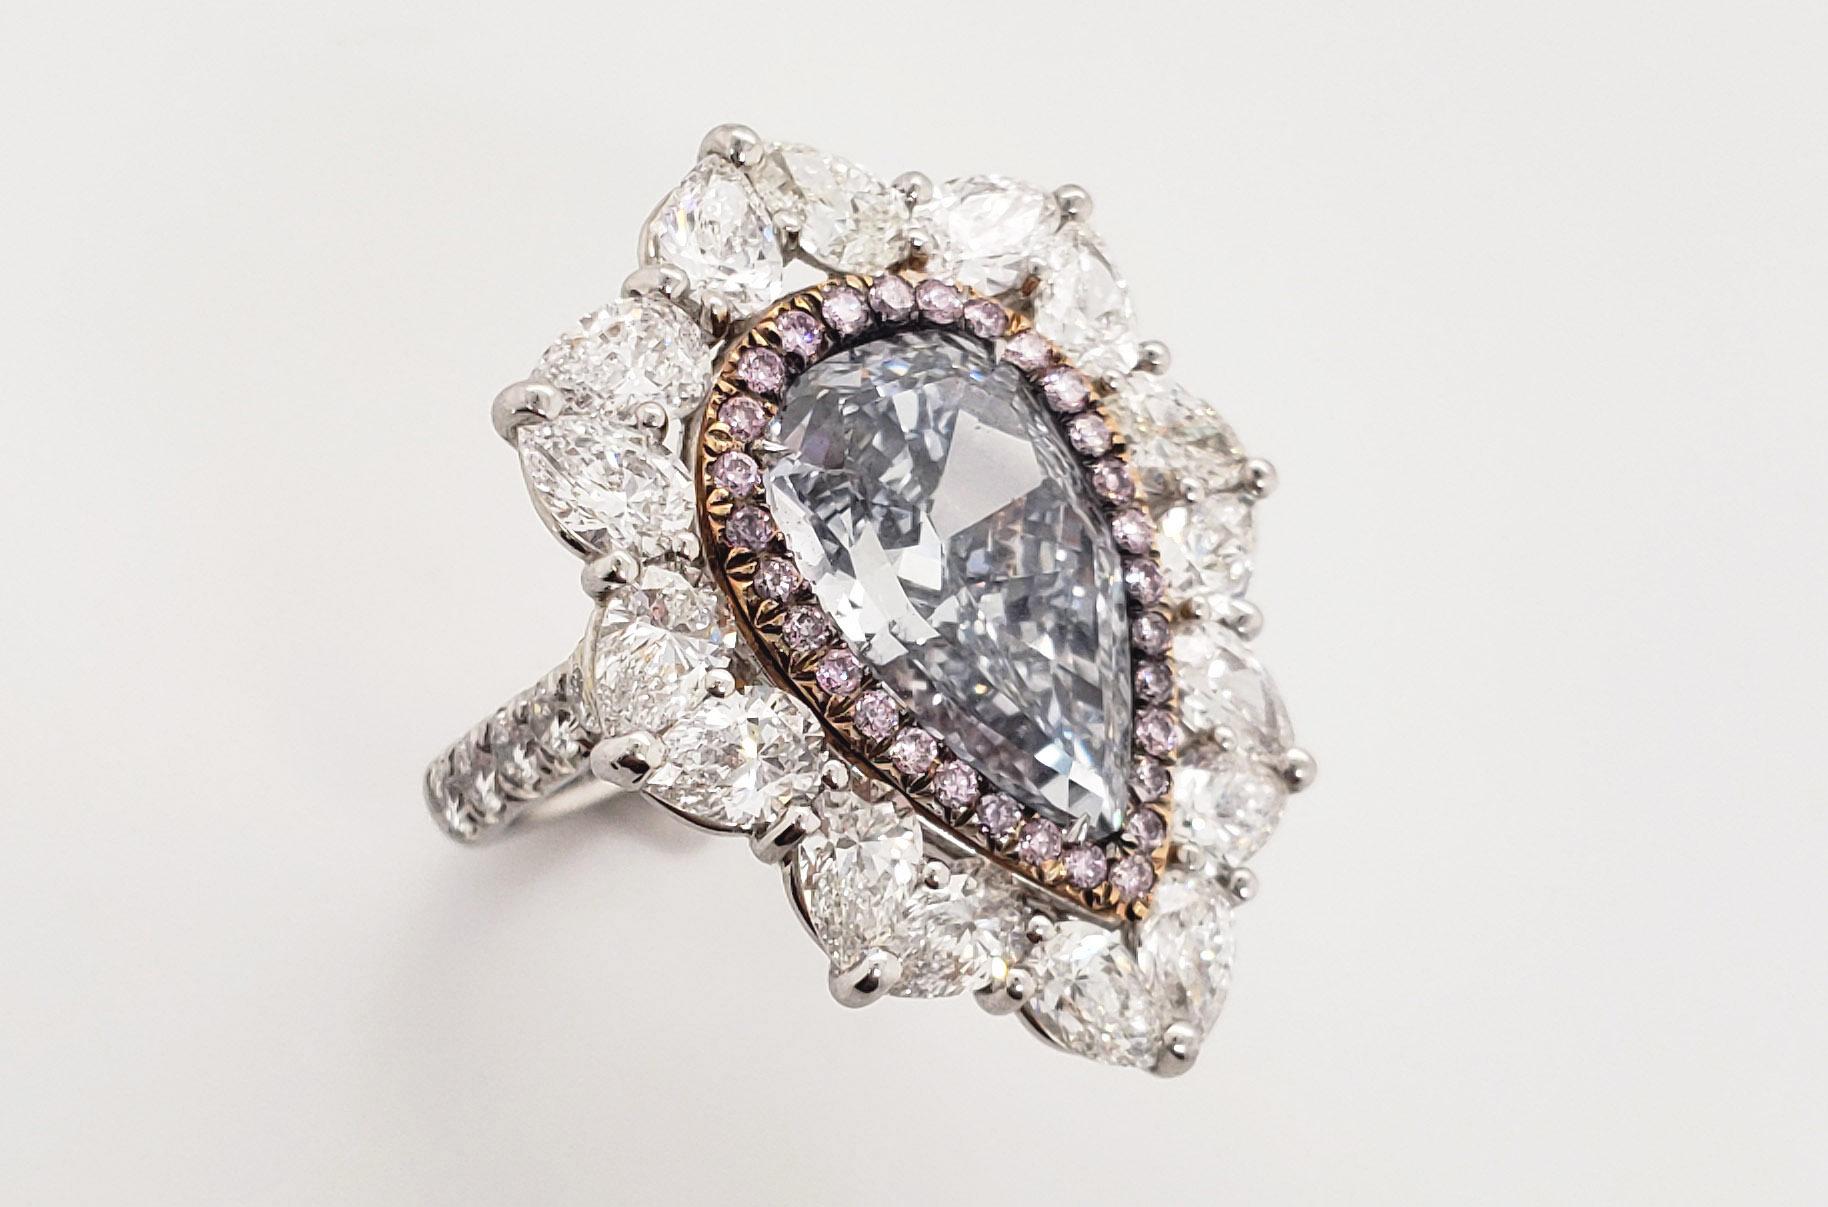 From Scarselli, this extraordinary ring features a large 6 carat Fancy Grayish Blue Pear shaped cut diamond,  VS1 clarity (see certificate picture for detailed stone's information). This gorgeous diamond is set off with fancy pink round cut diamonds